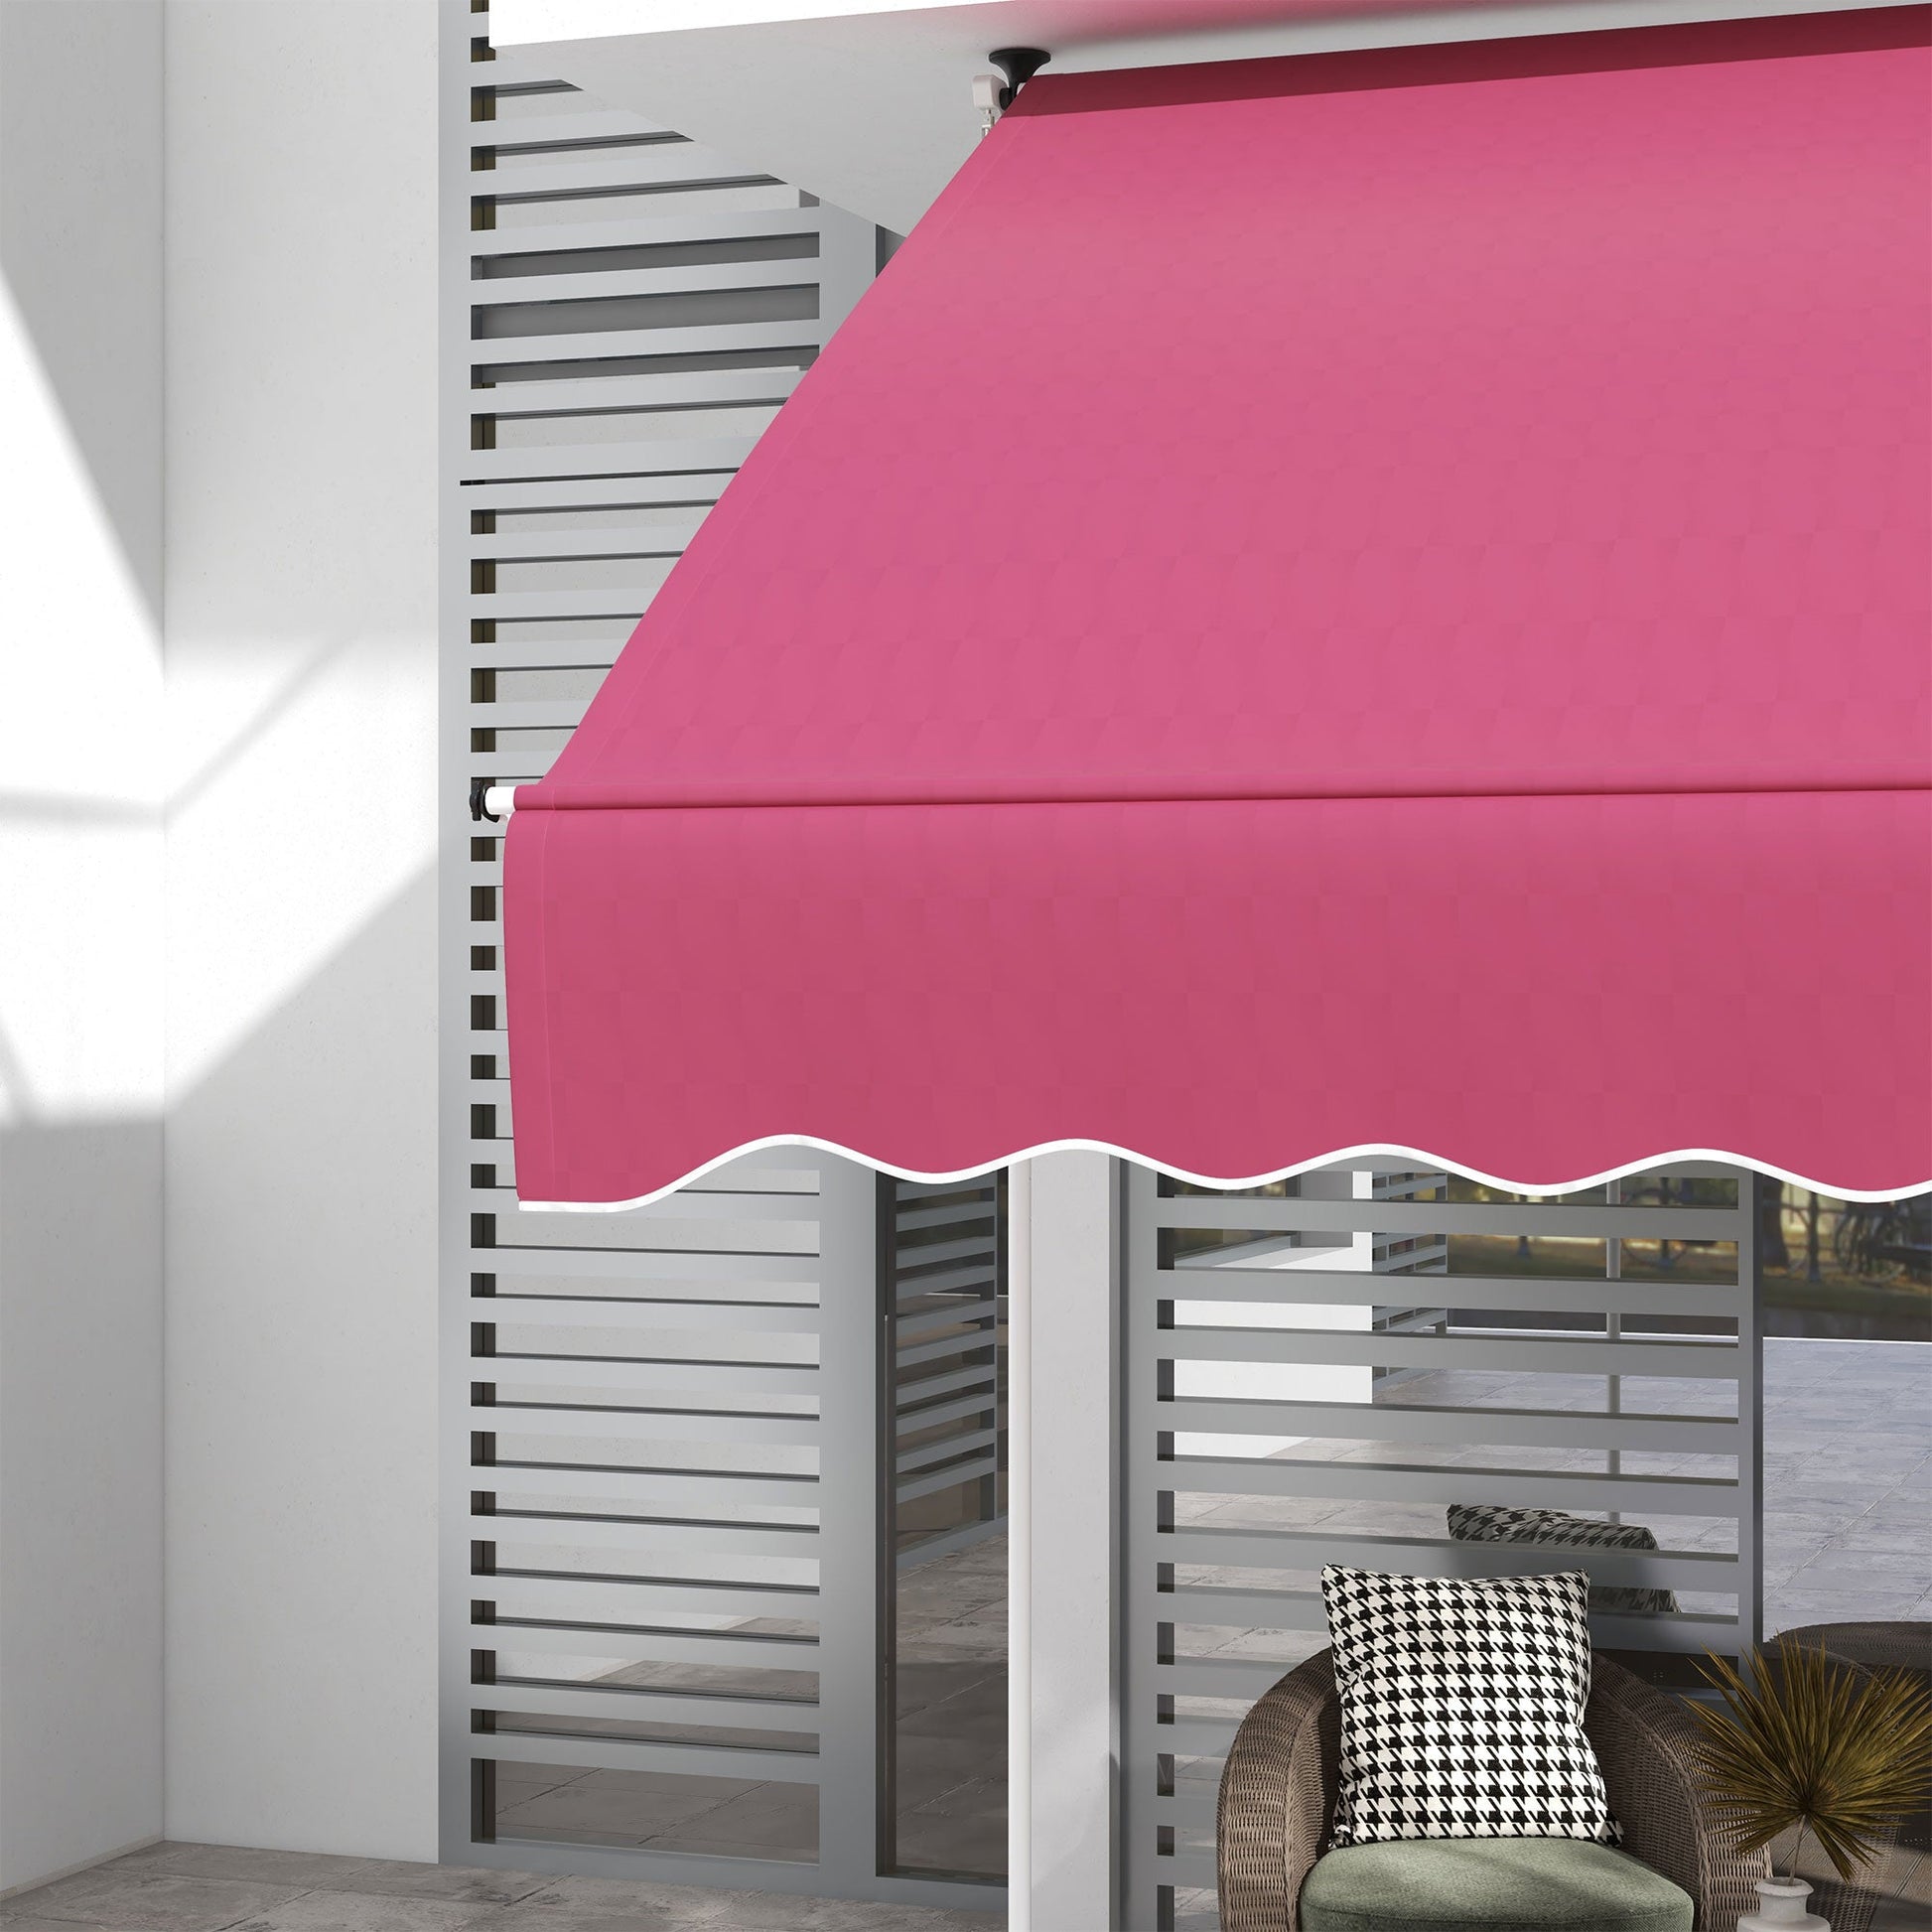 6.6'x5' Manual Retractable Patio Awning Sun Shelter Window Door Deck Canopy, Water Resistant UV Protector, Wine Red at Gallery Canada